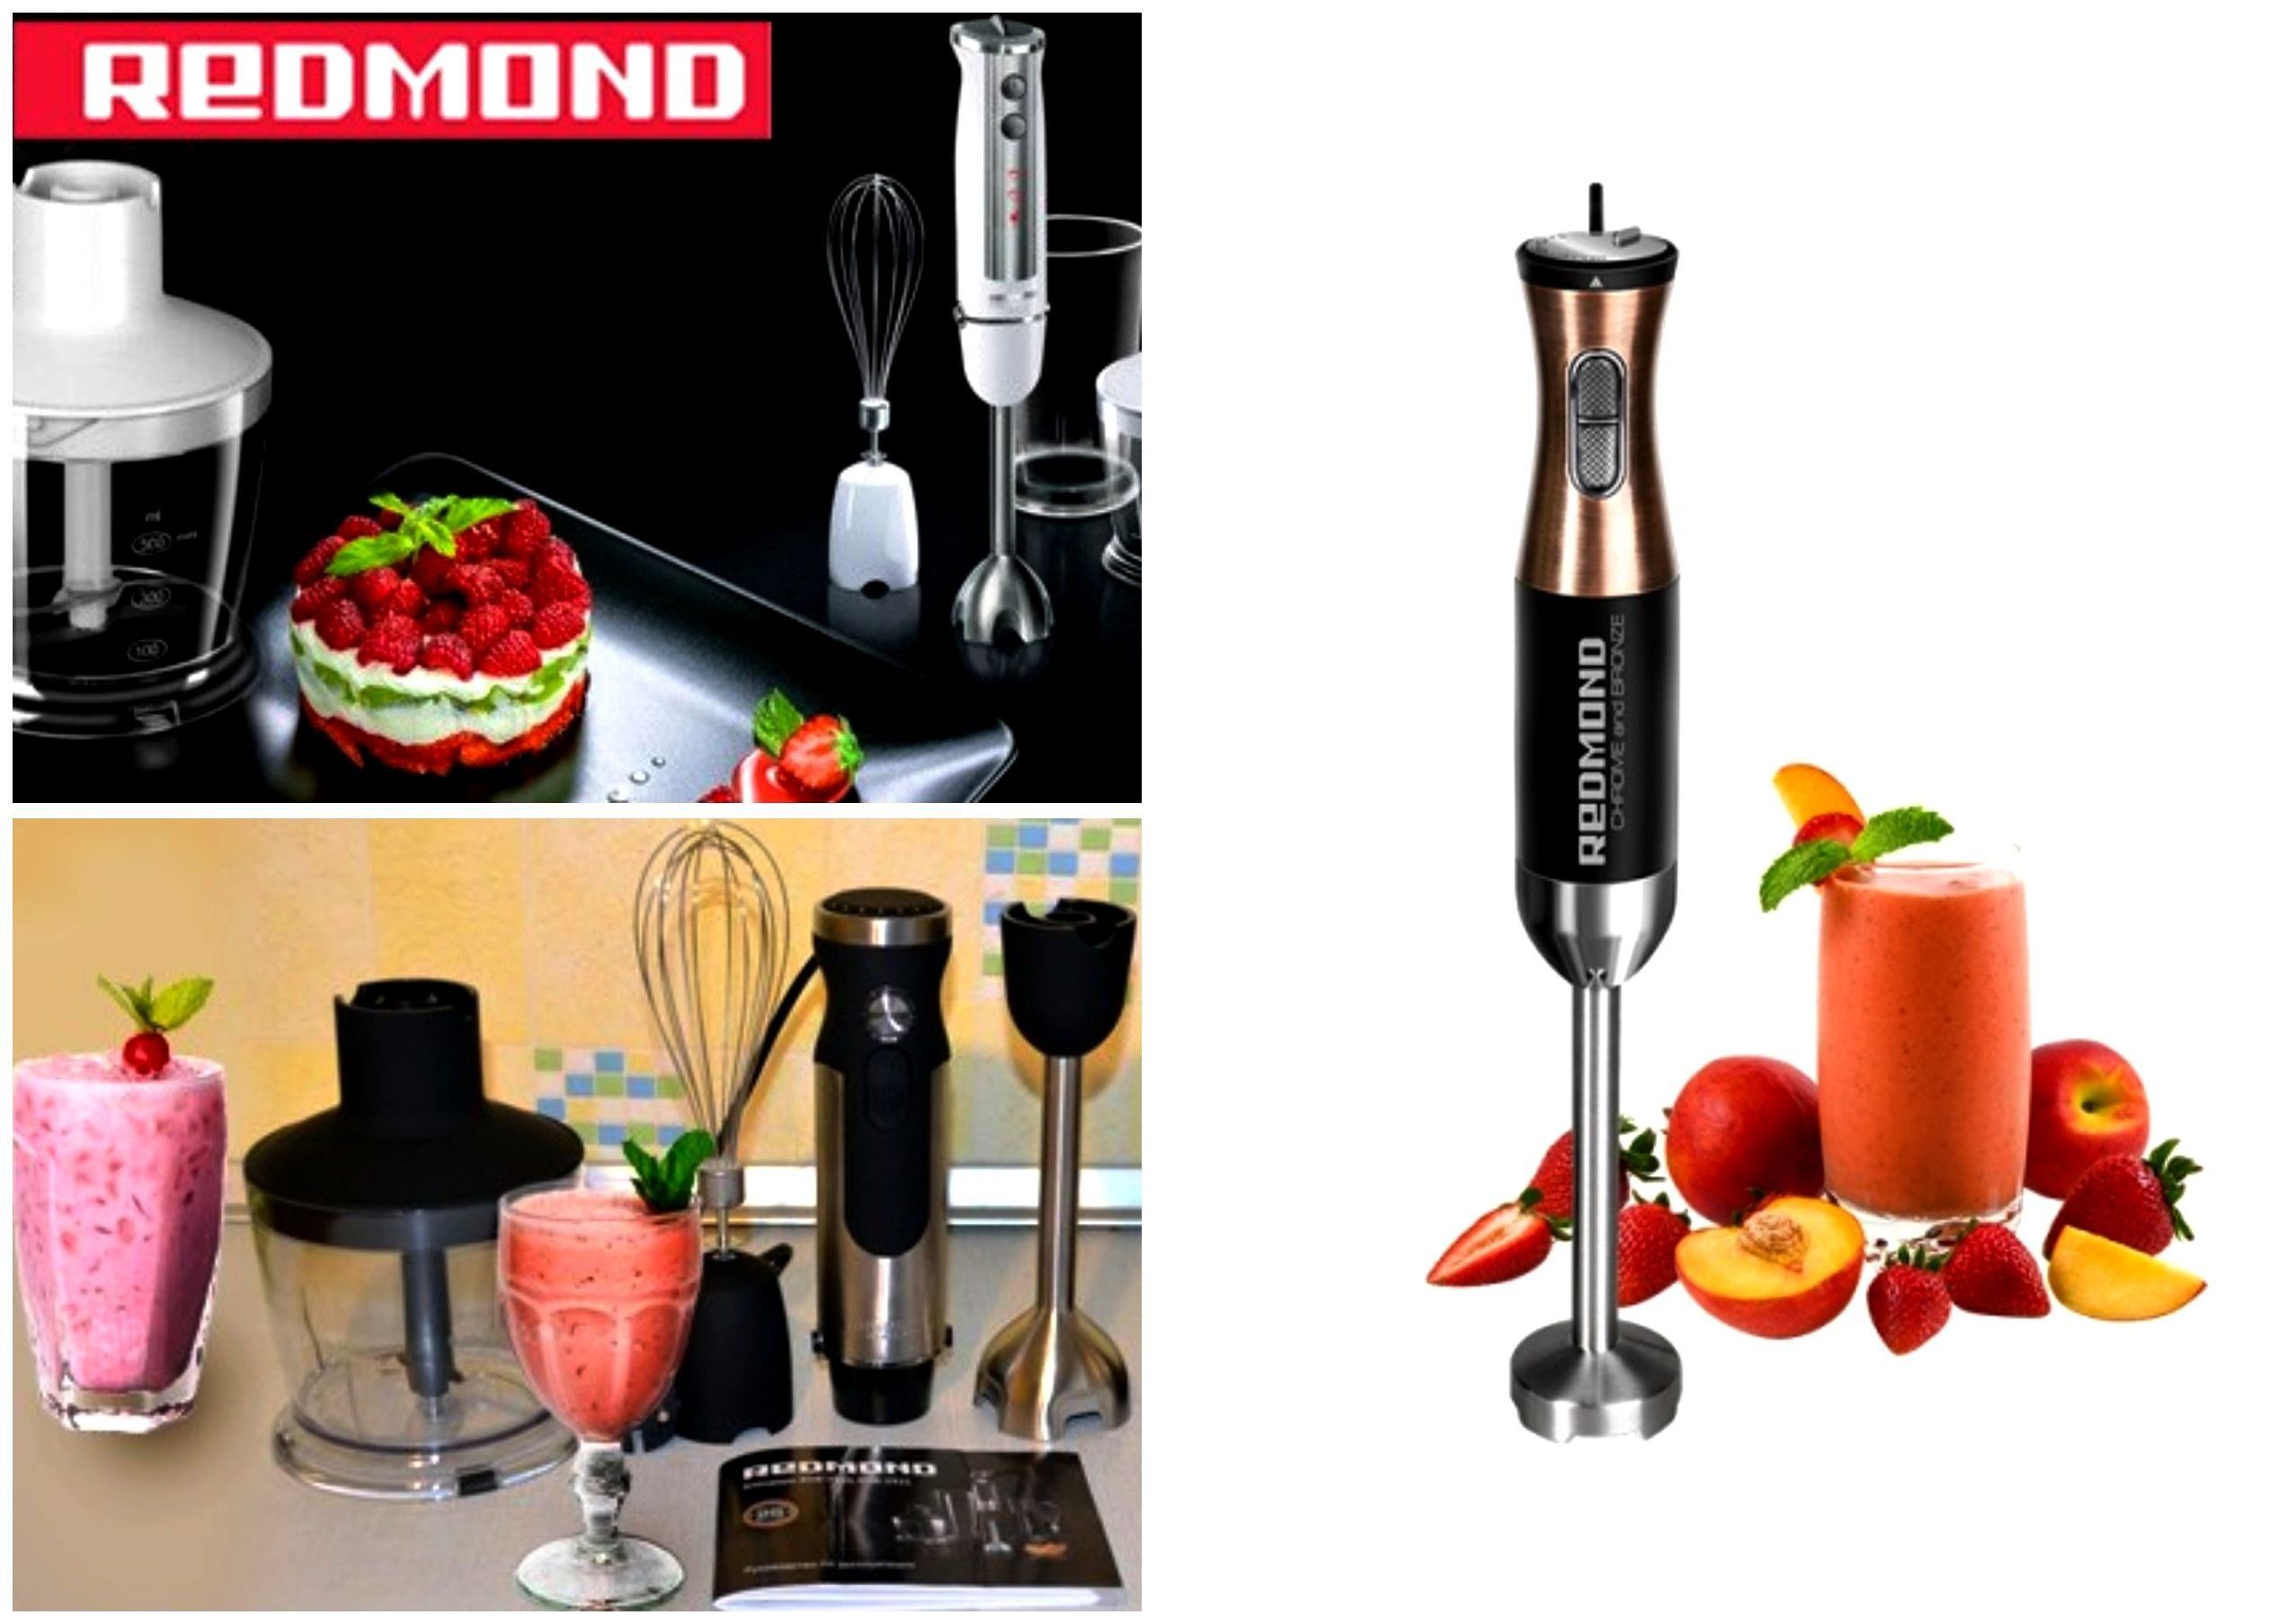 Blender of the Redmond brand is the best gift for the hostess